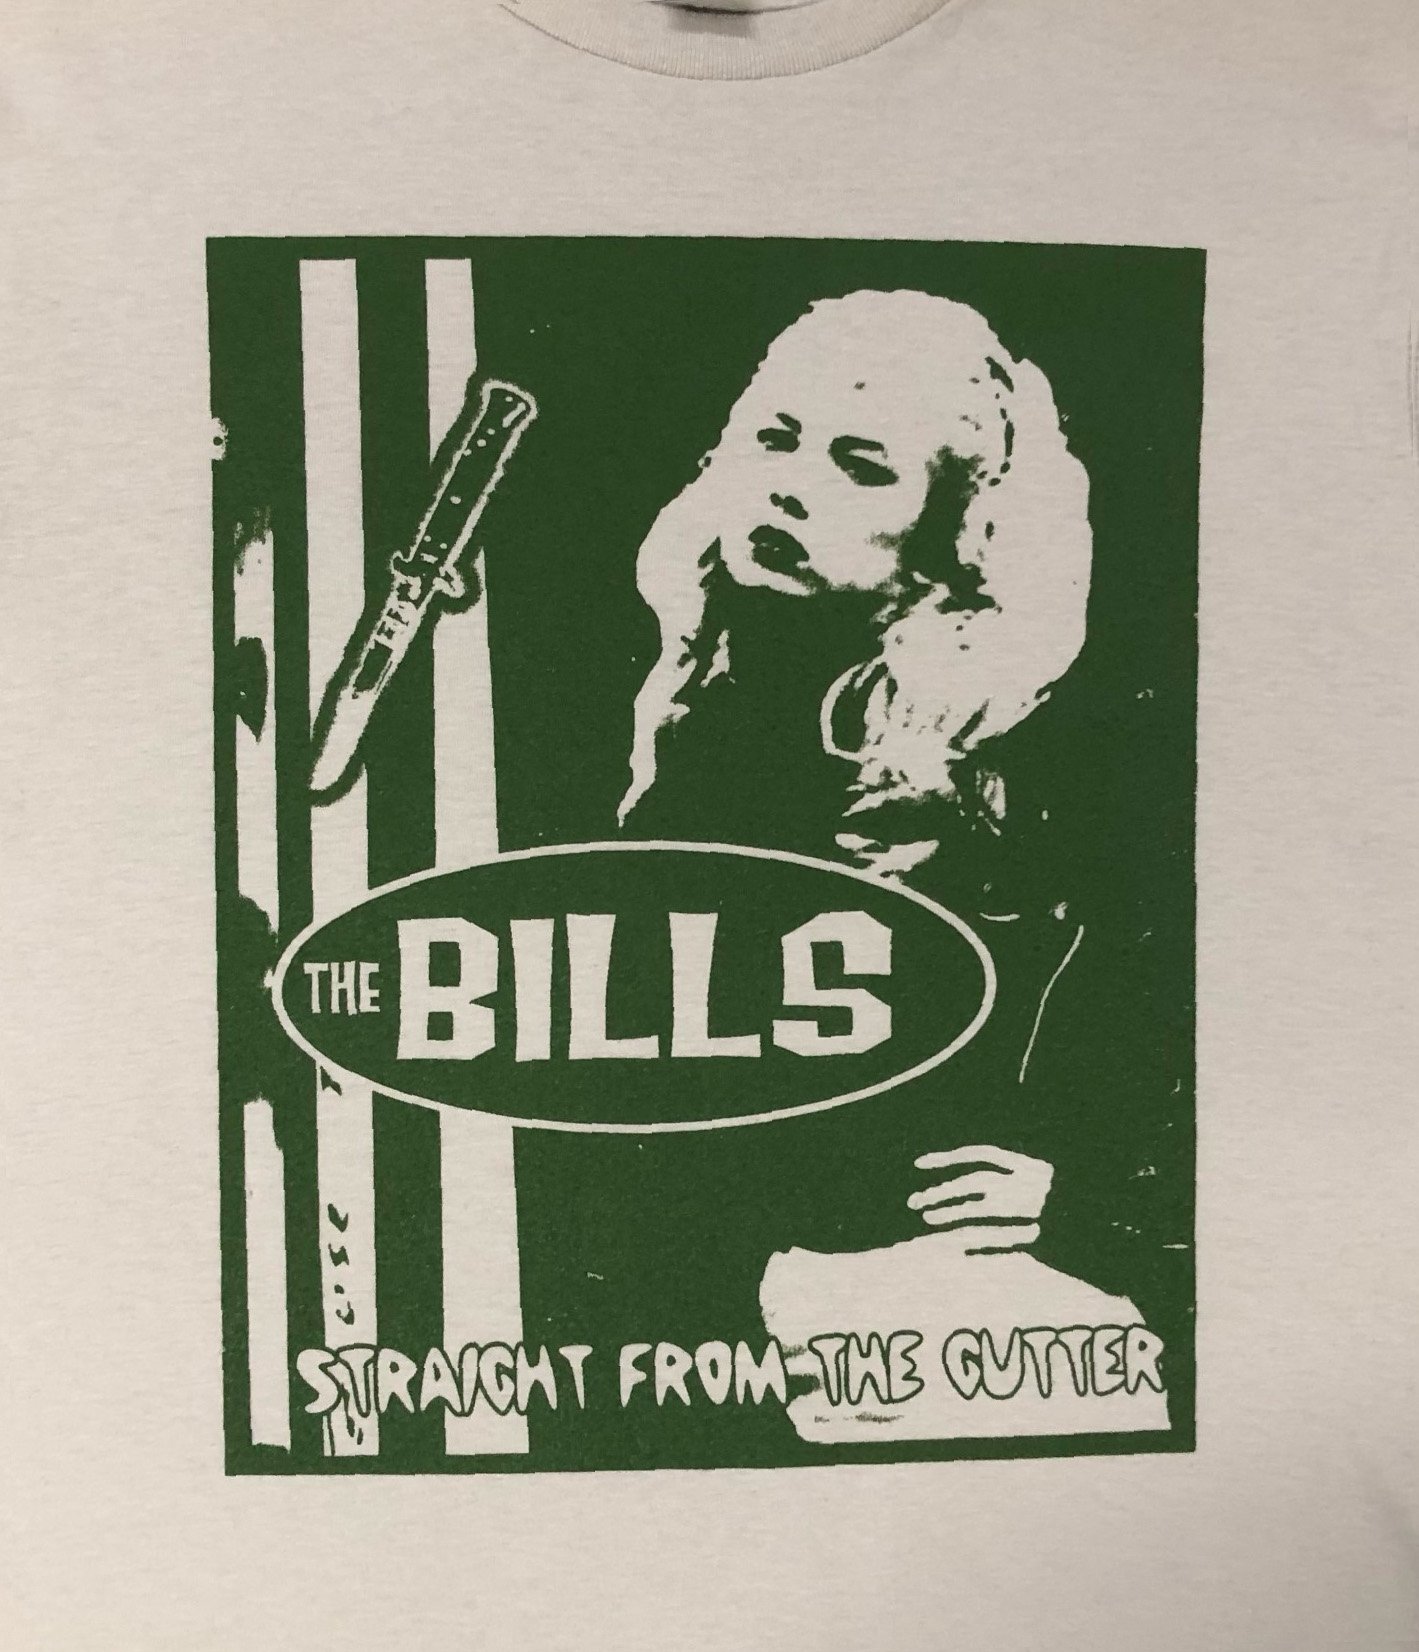 Image of The Bills "Straight From The Gutter" Shirt